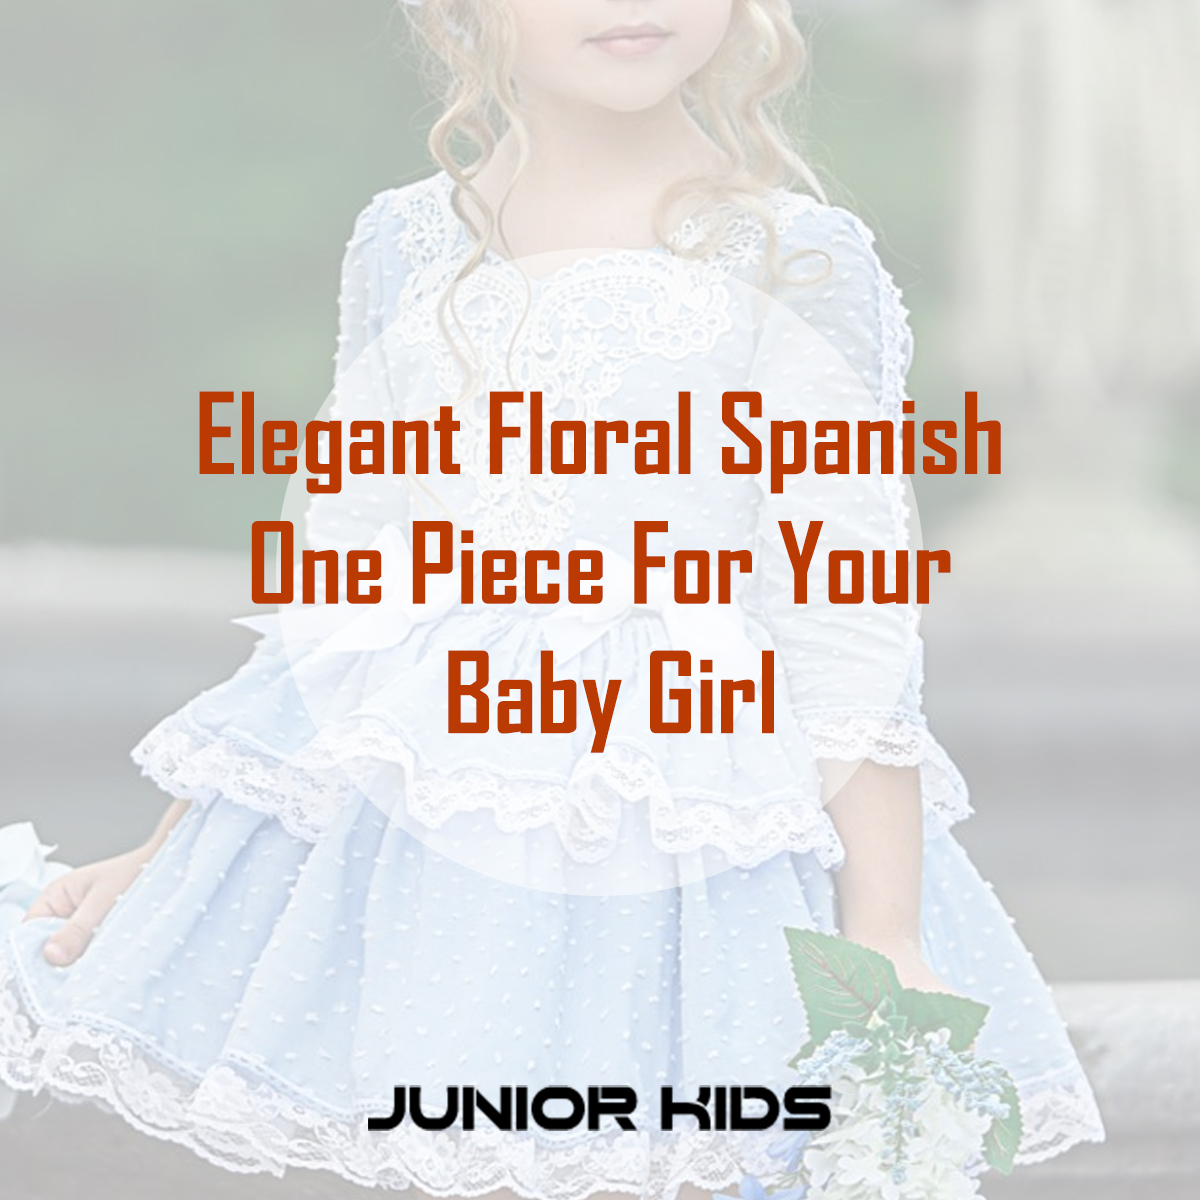 Junior Kids Limited Our Baby Girls One Piece Elegant Floral Spanish Collection Will Surprise You We Got The Best Collections Saved For Your Cutie Pie Have A Look At The